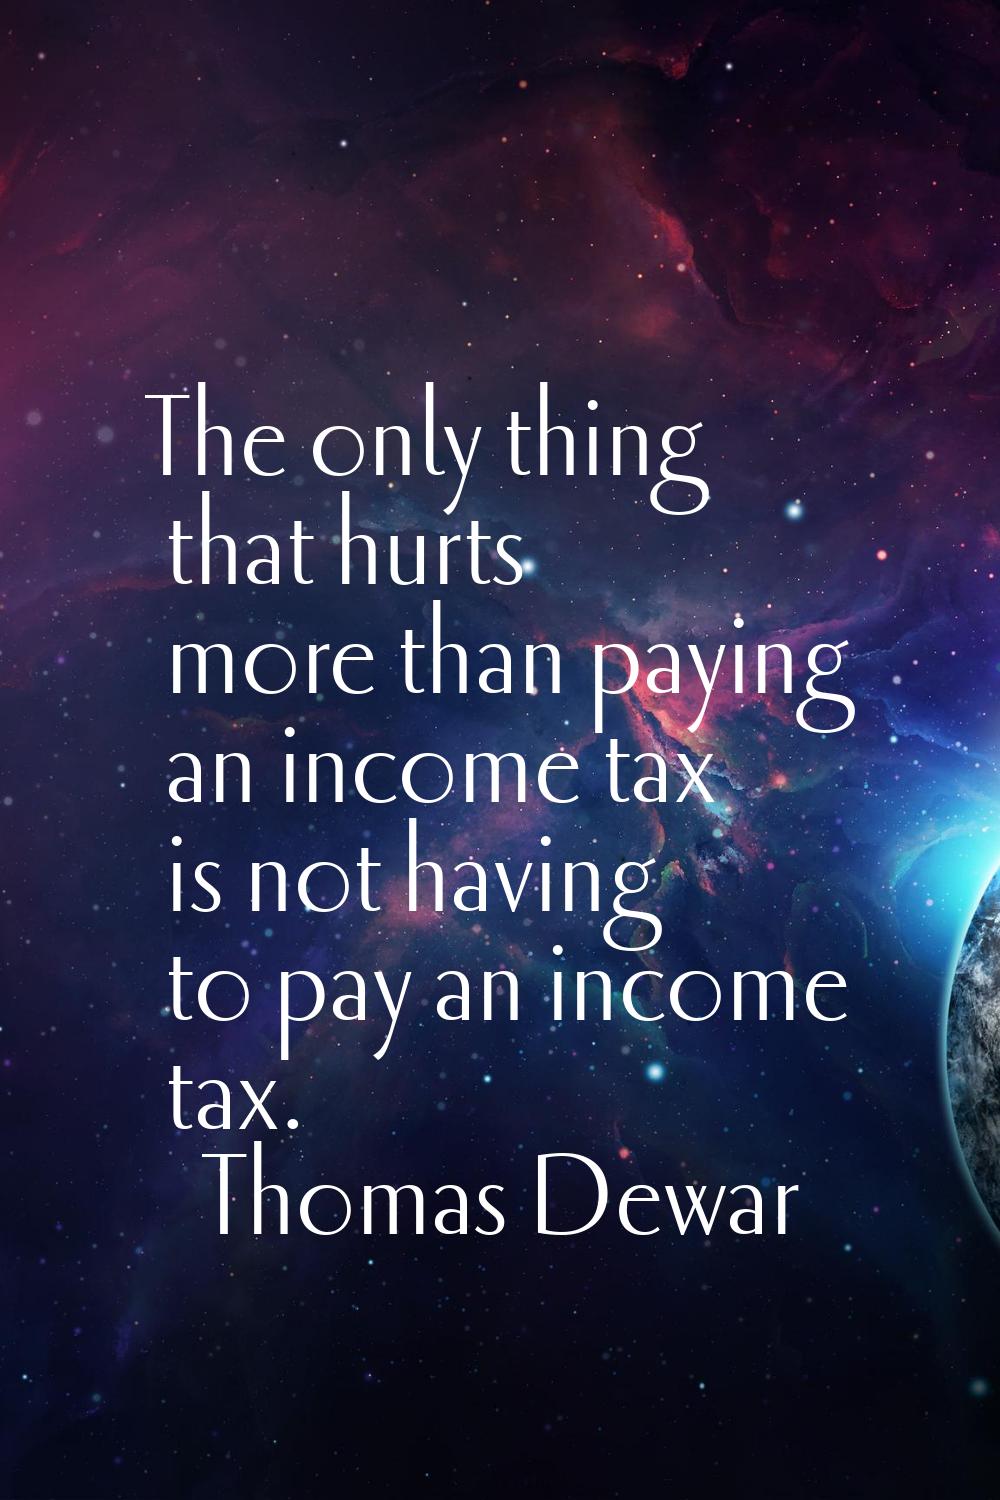 The only thing that hurts more than paying an income tax is not having to pay an income tax.